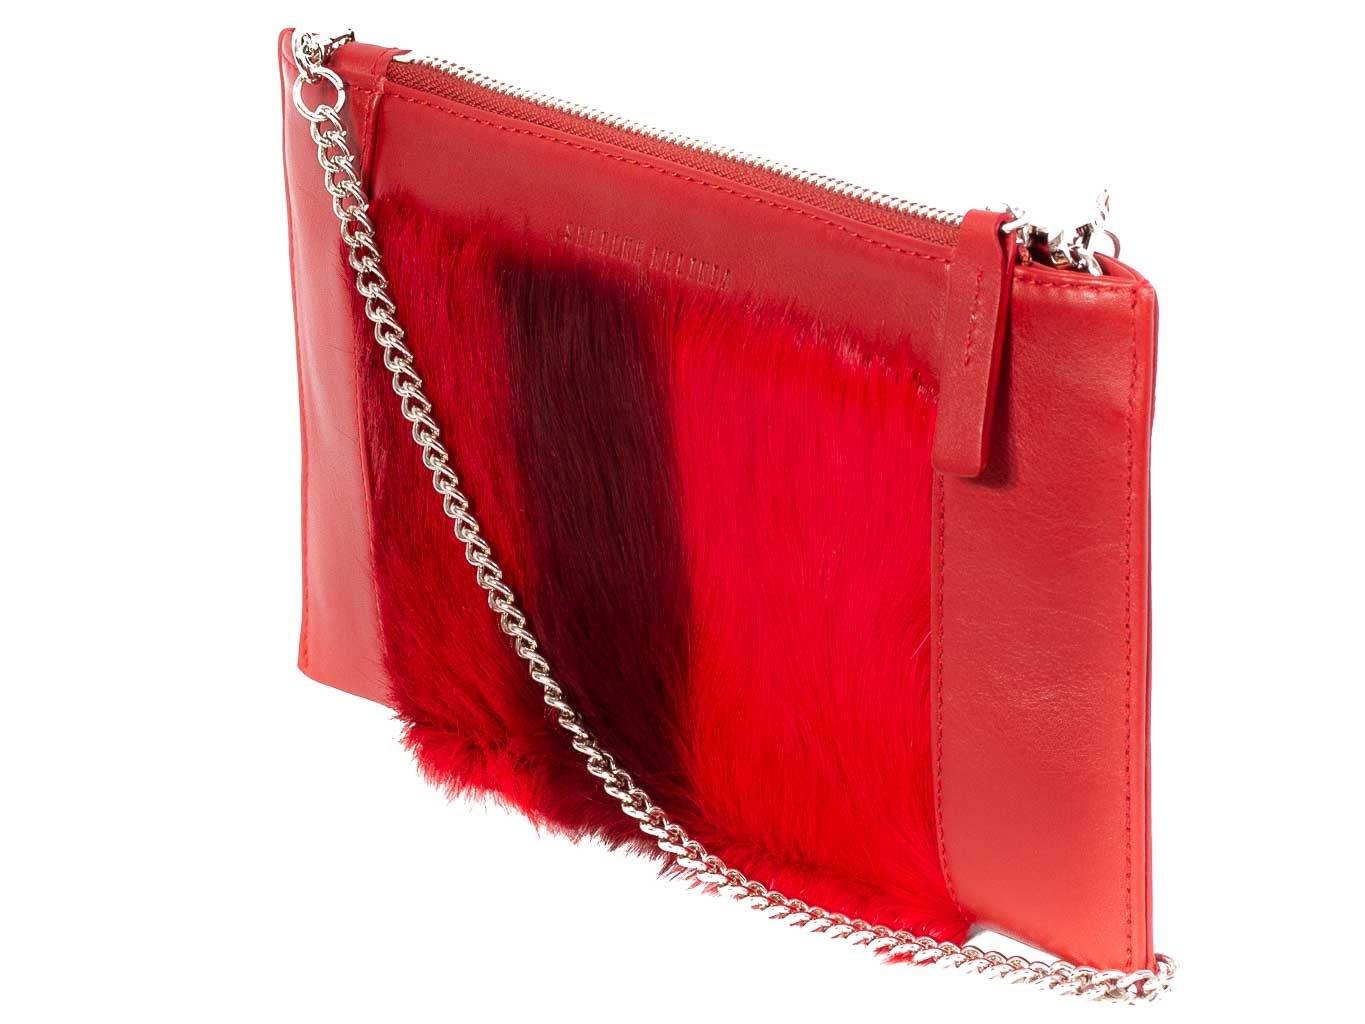 Clutch Springbok Handbag in Crimson Red with a stripe feature by Sherene Melinda side angle strap